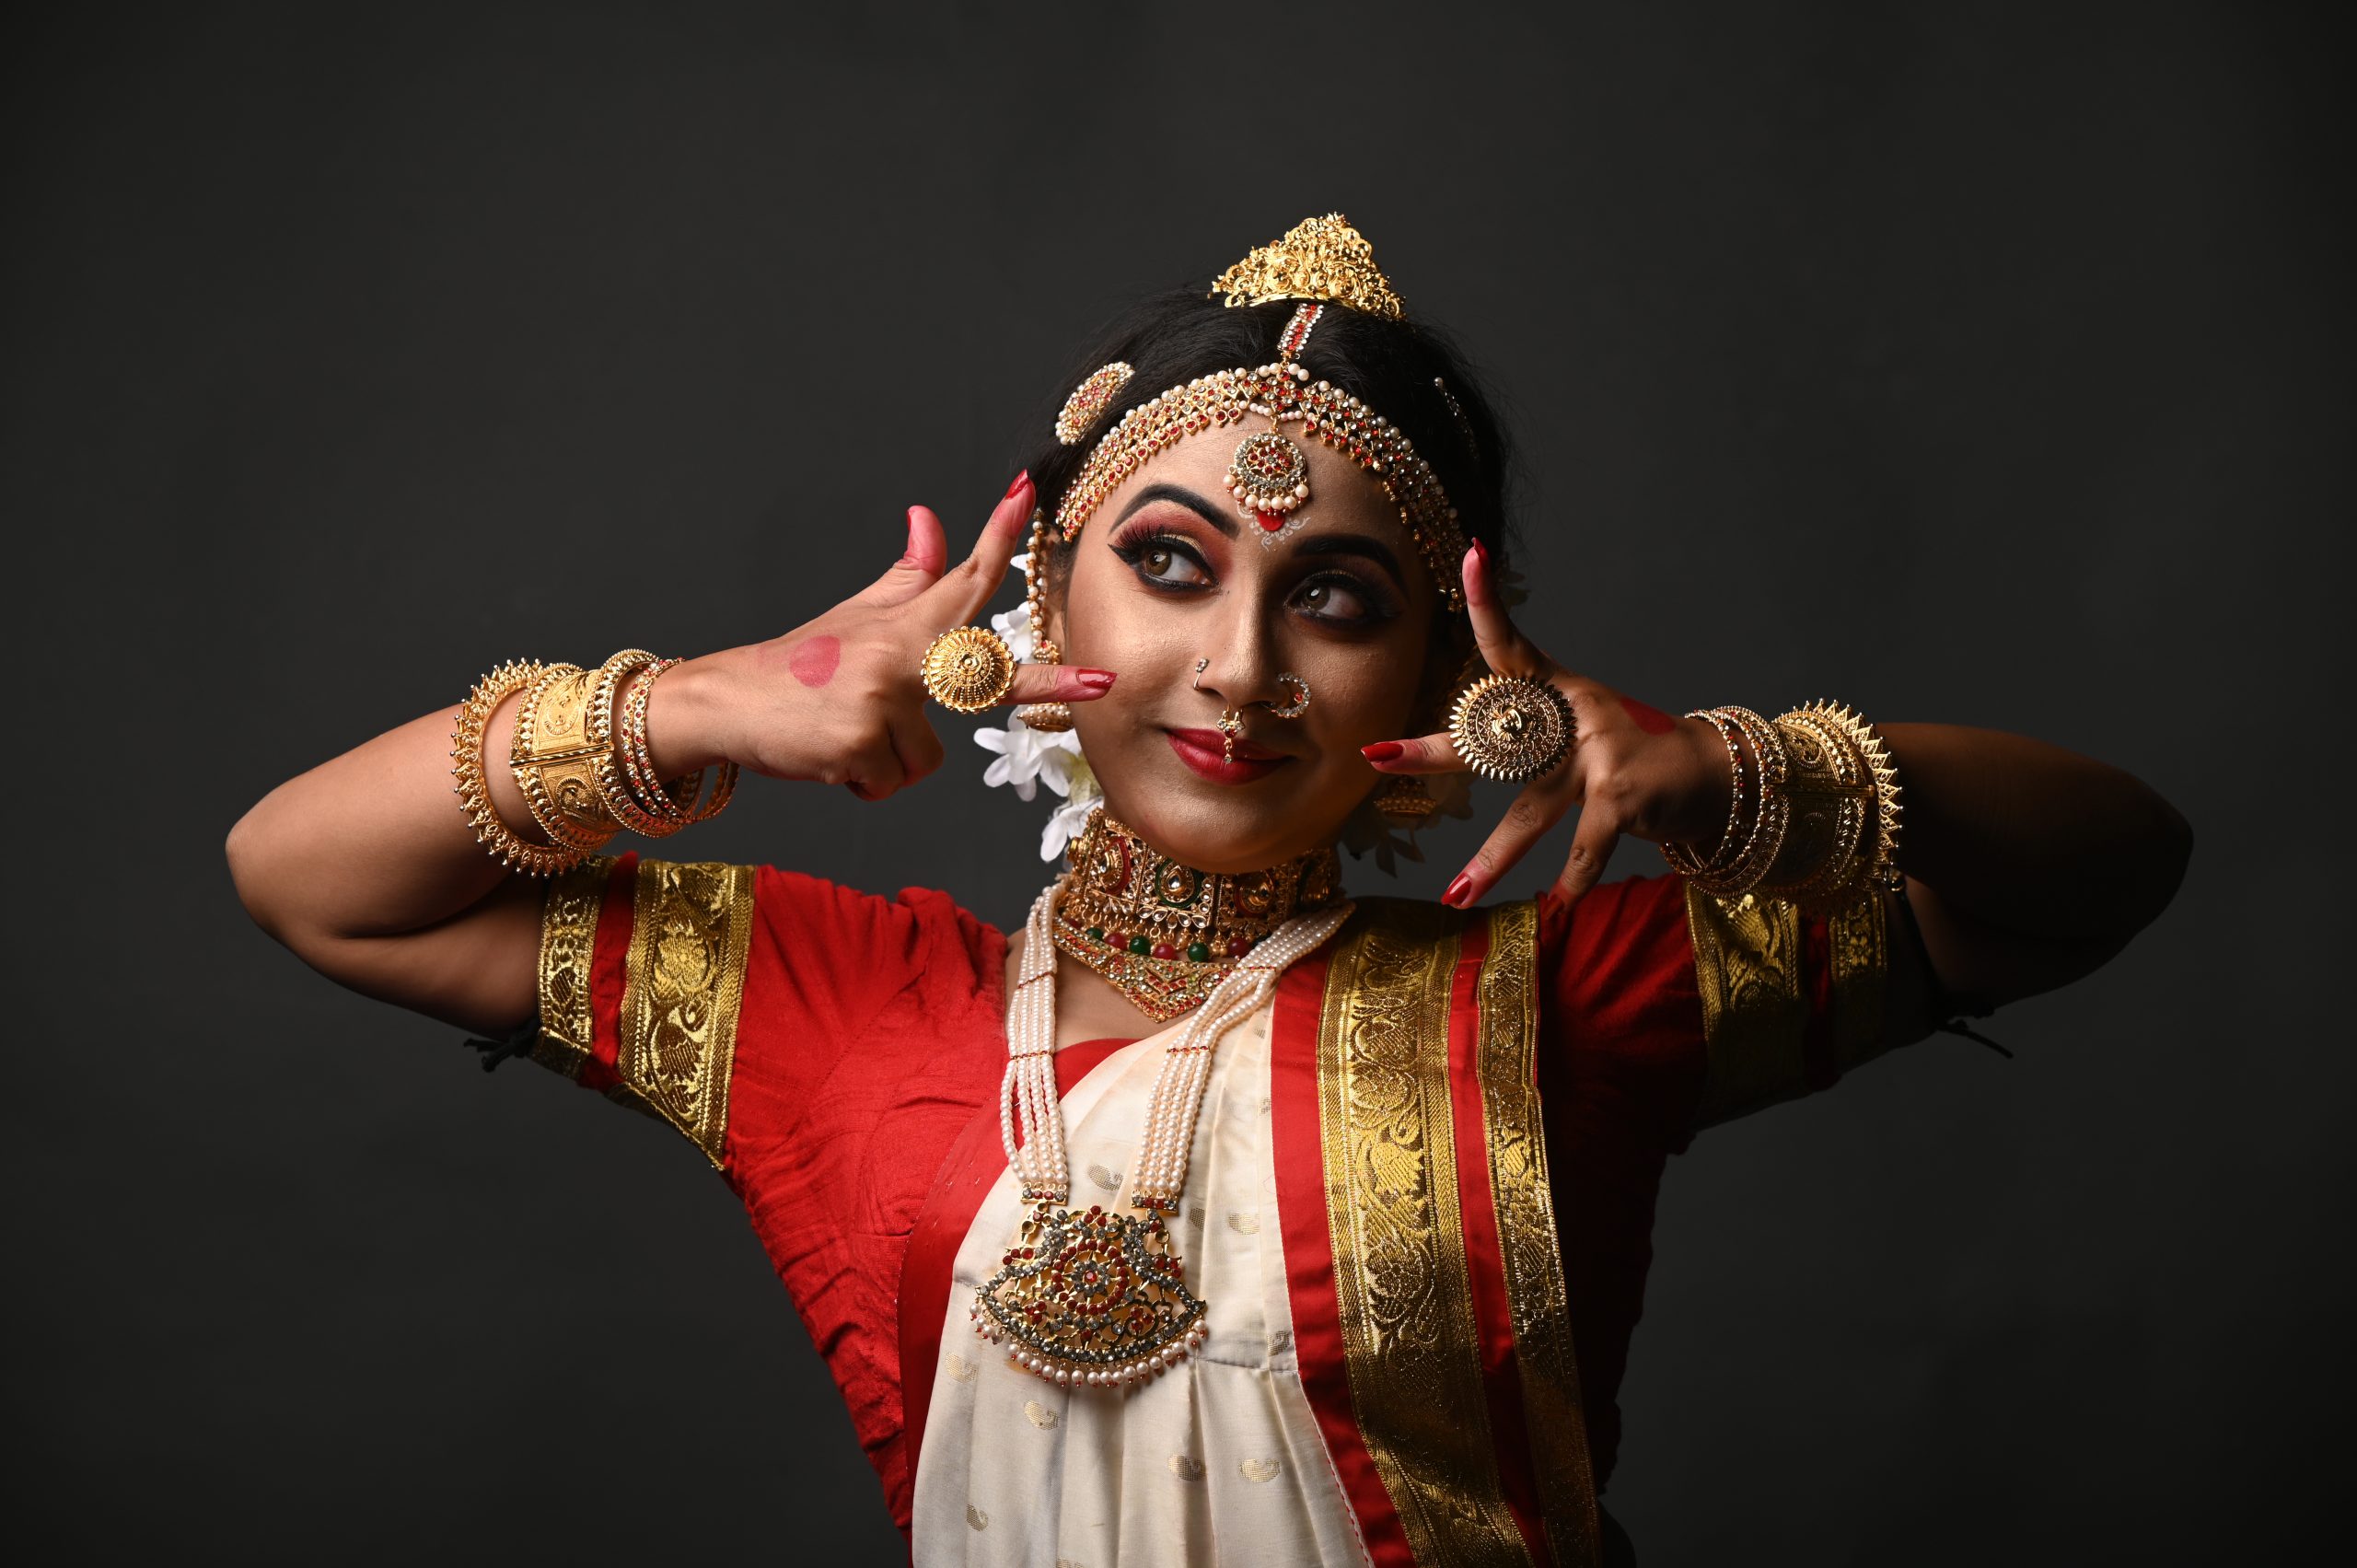 Dancer with expressions